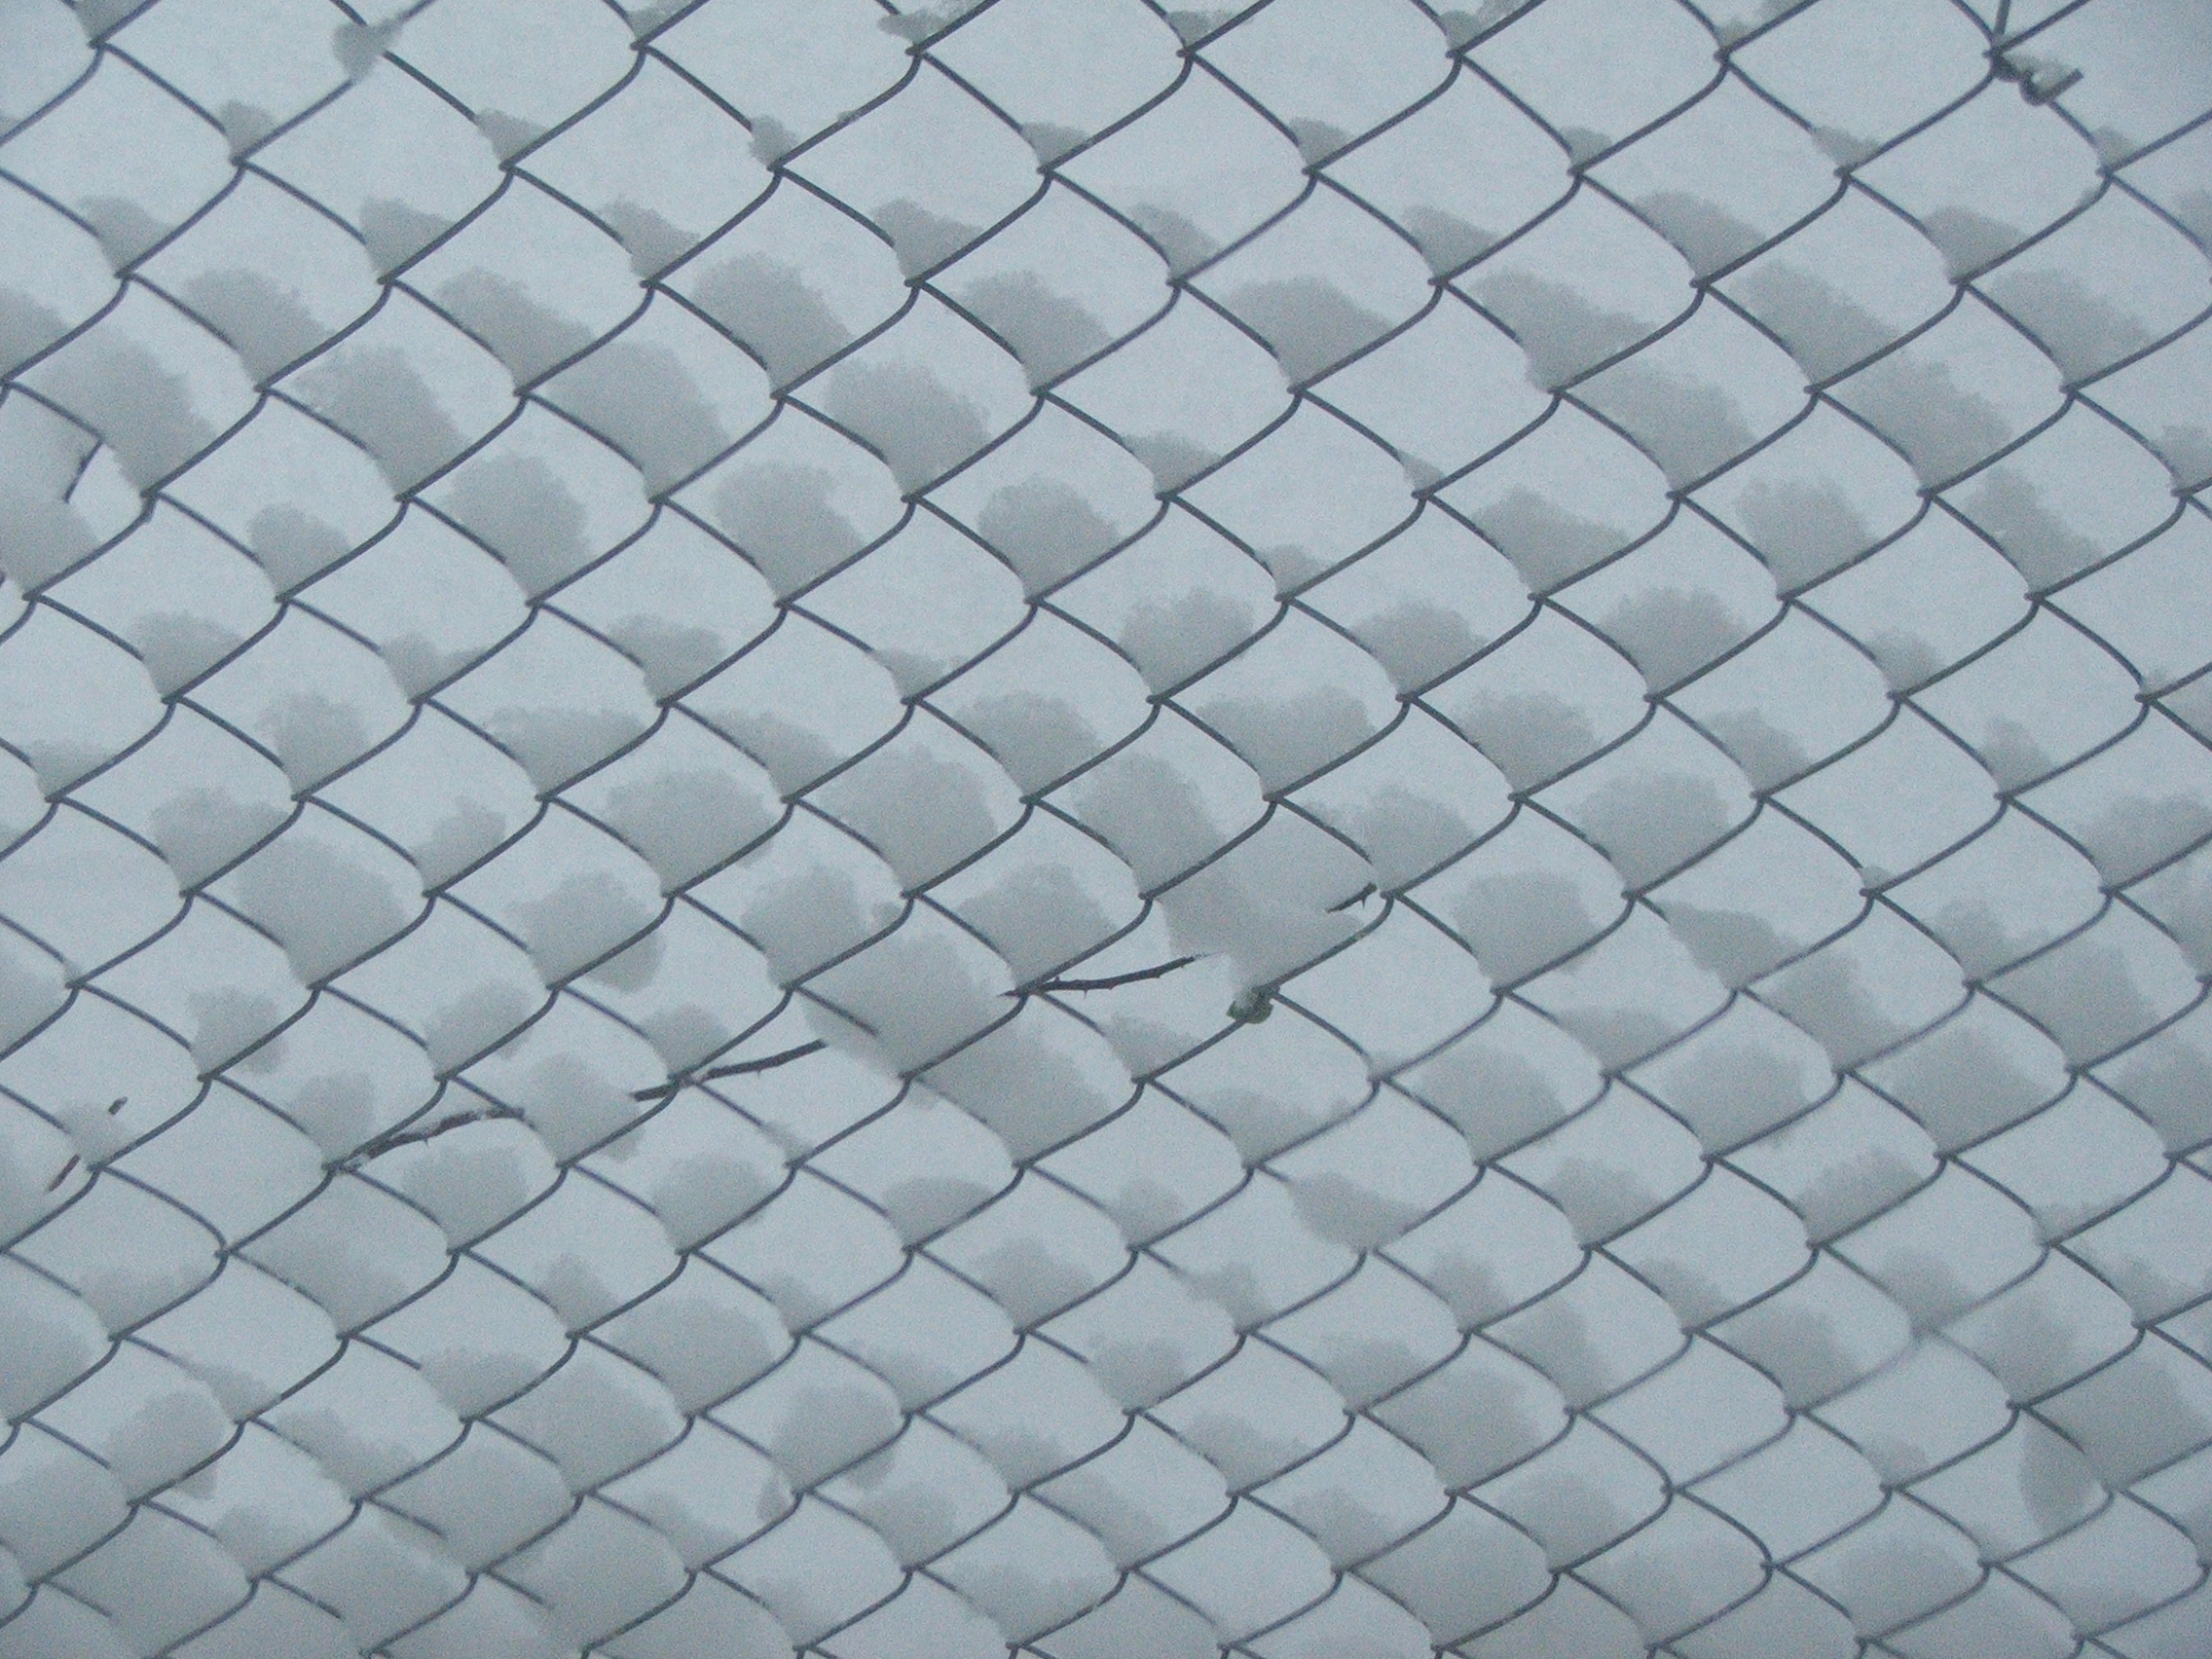 Snow on wire fence photo